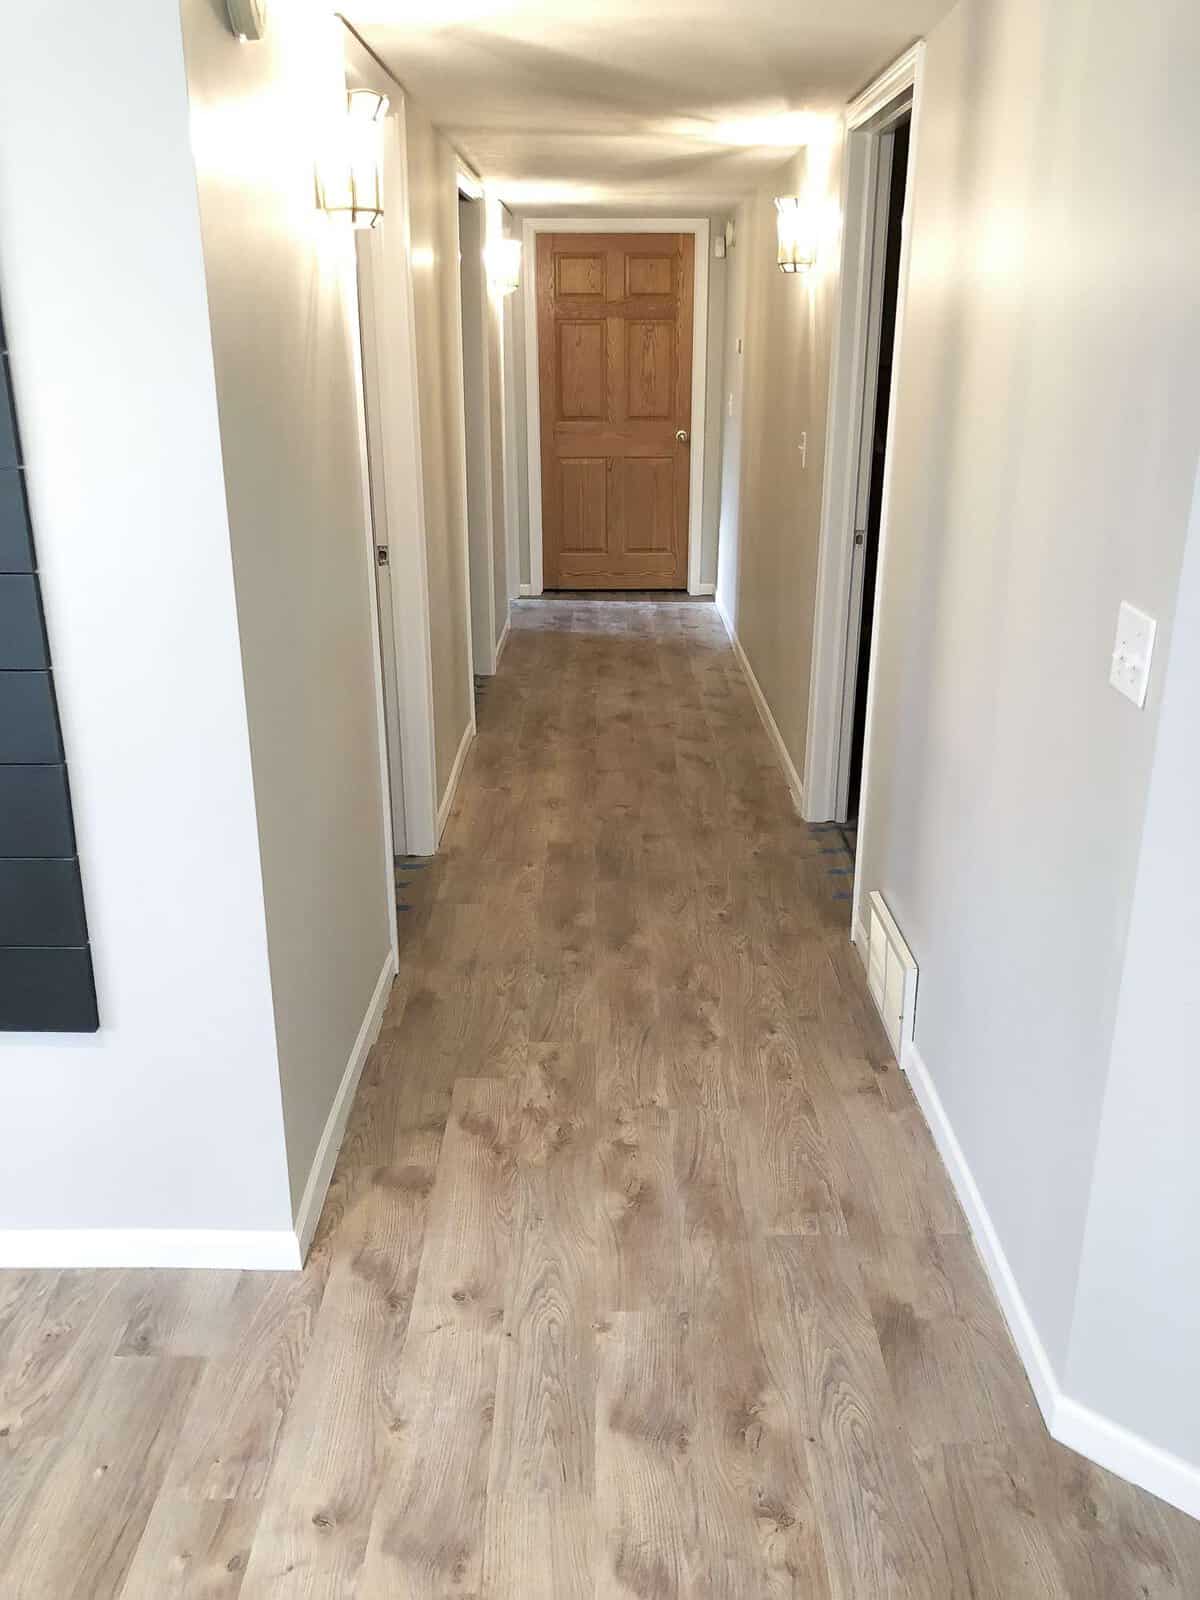 Looking for beautiful basement flooring that will stand up to water, pets and kids? Here is a modern farmhouse basement makeover with flooring made to last. #modernfarmhouse #basementflooring #basementremodel #fromhousetohaven